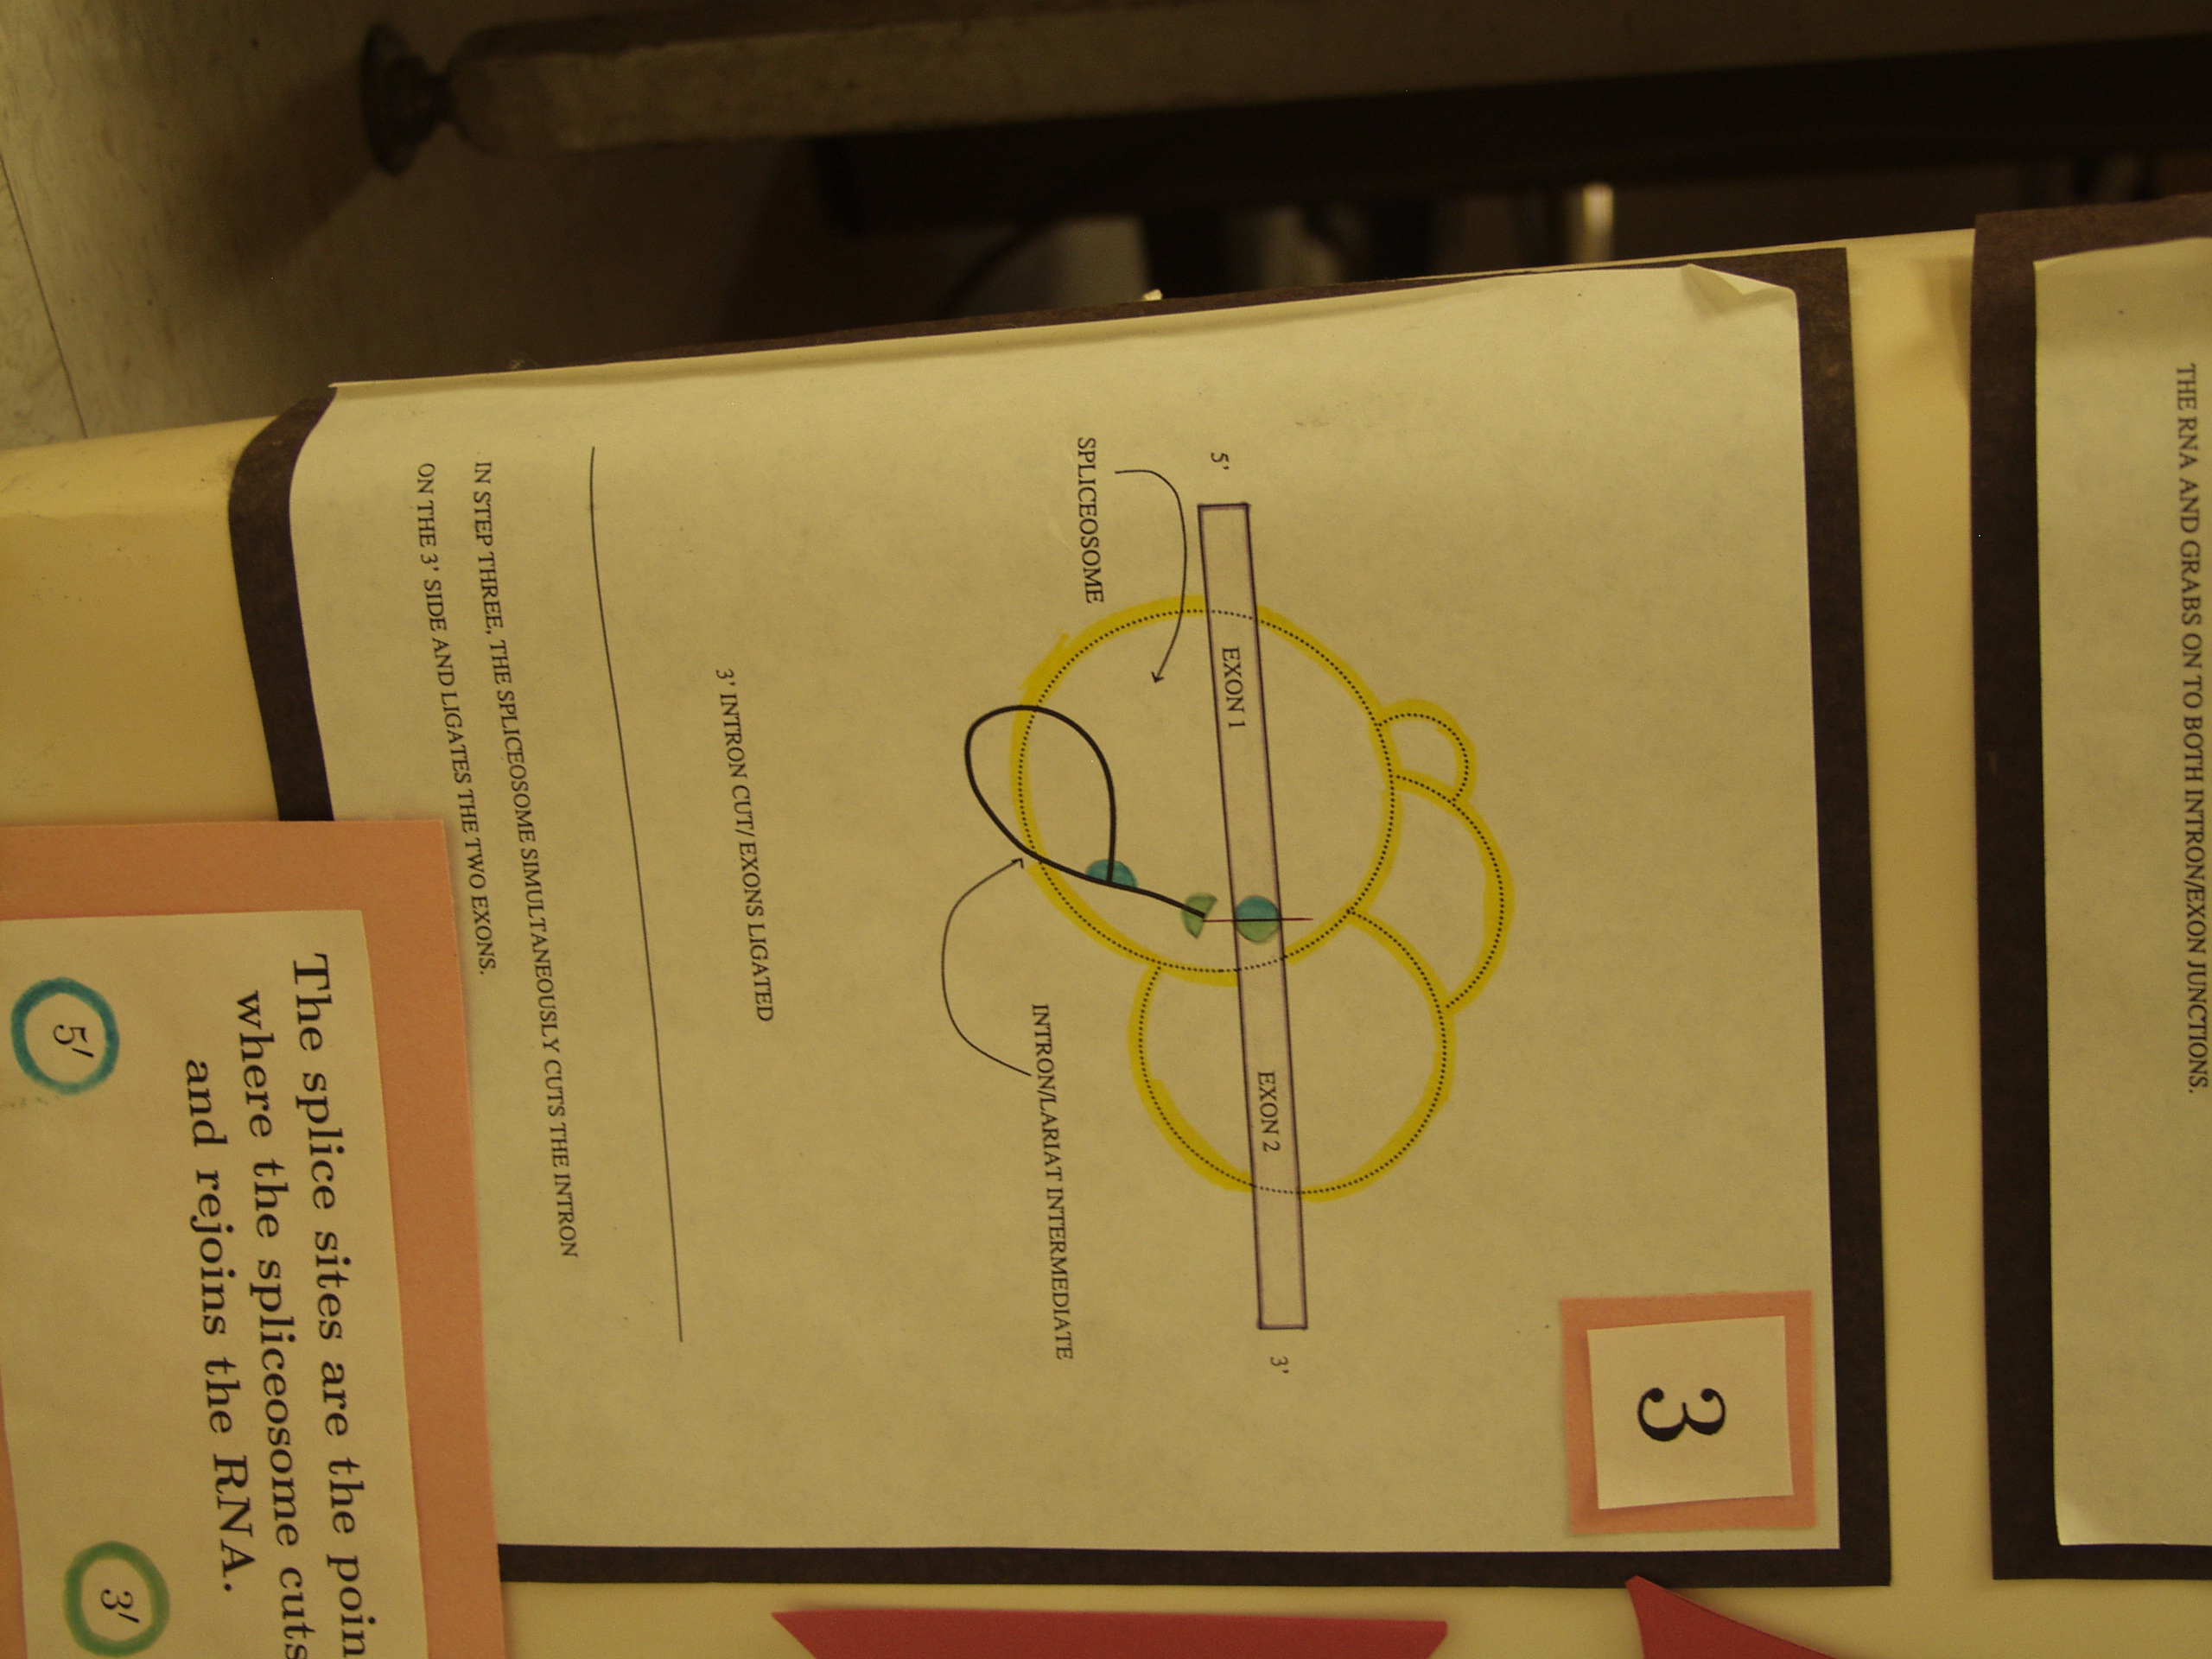 P8237791.JPG Photograph of Mike Stephen's 1990 science fair poster 'Information analysis of RNA splice sites'